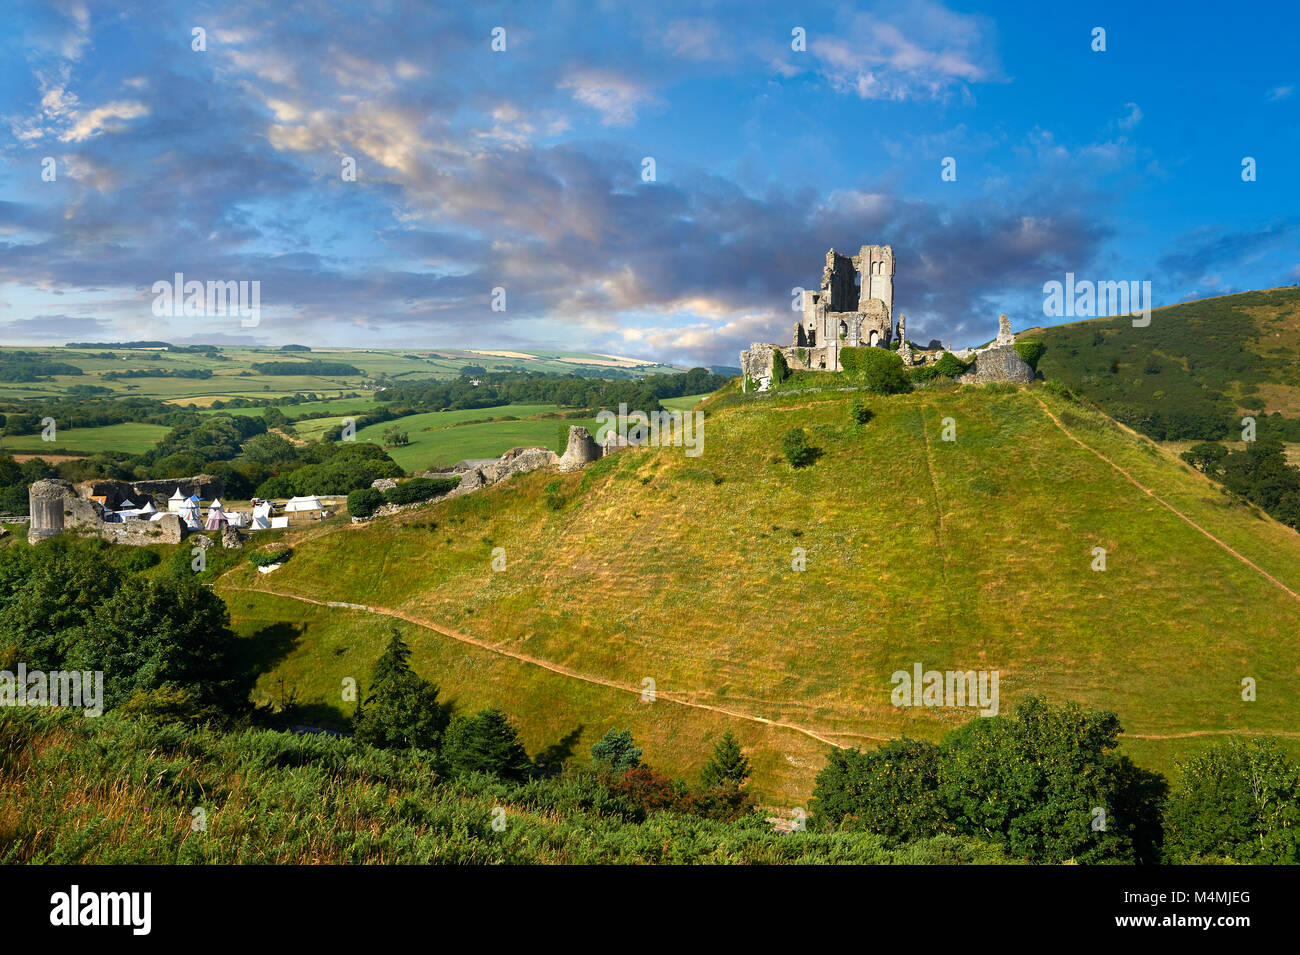 Medieval Corfe castle keep & battlements at sunrise, built in 1086 by William the Conqueror, Dorset England Stock Photo